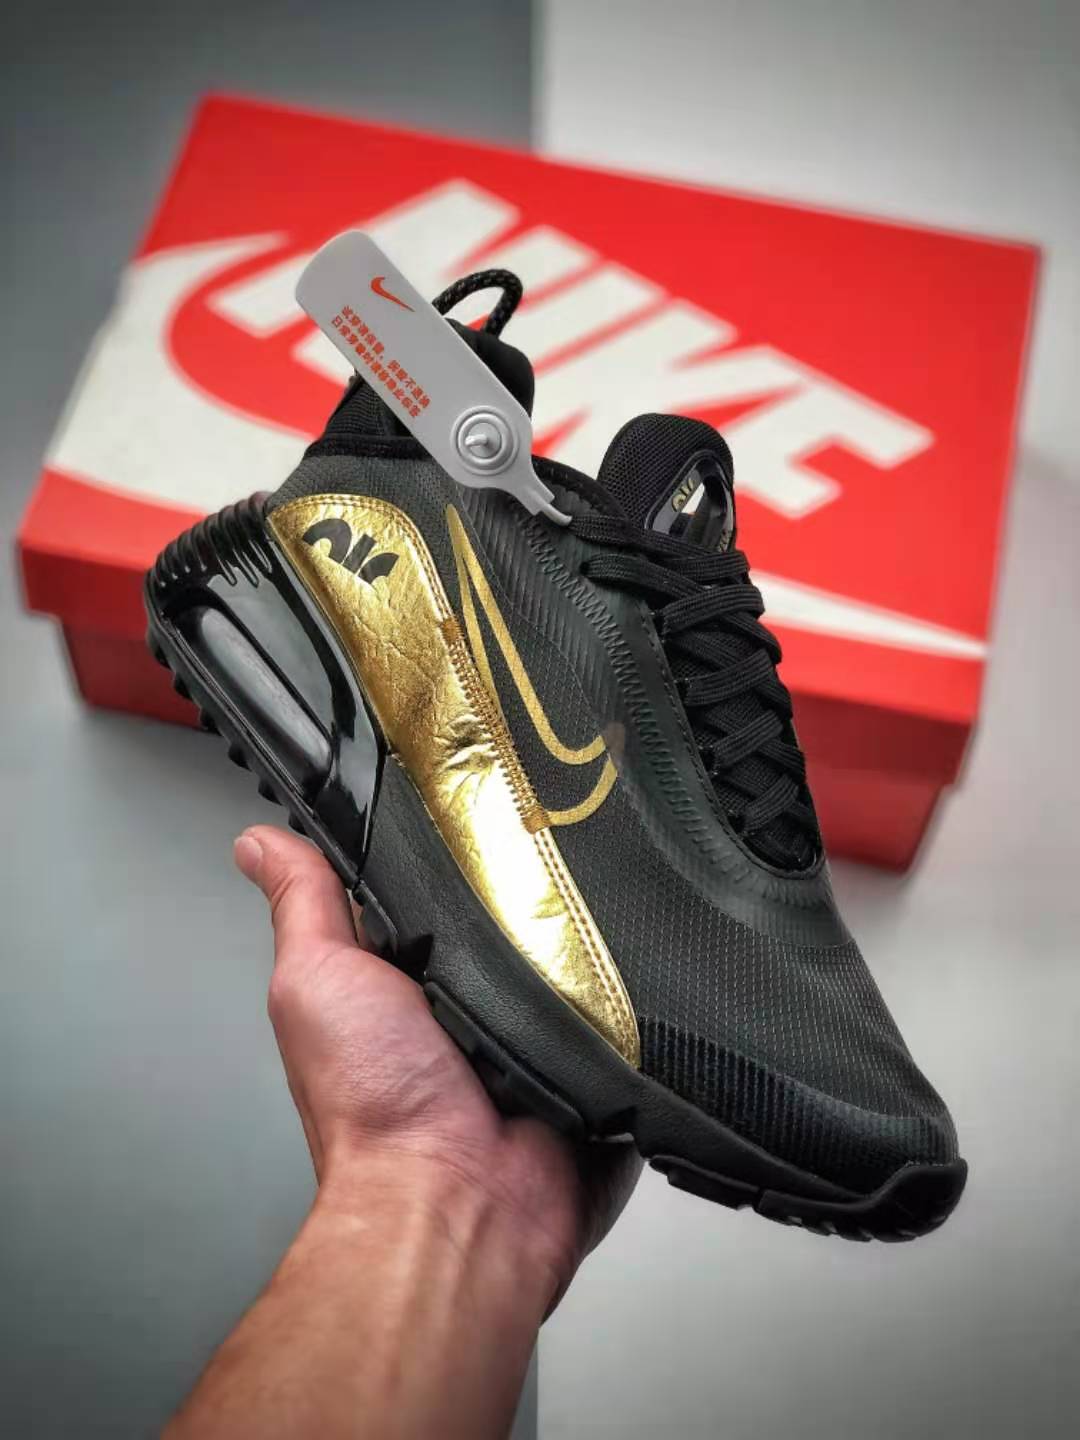 Nike Air Max 2090 'Black Metallic Gold' DC2191-001 - Latest Release at Best Price